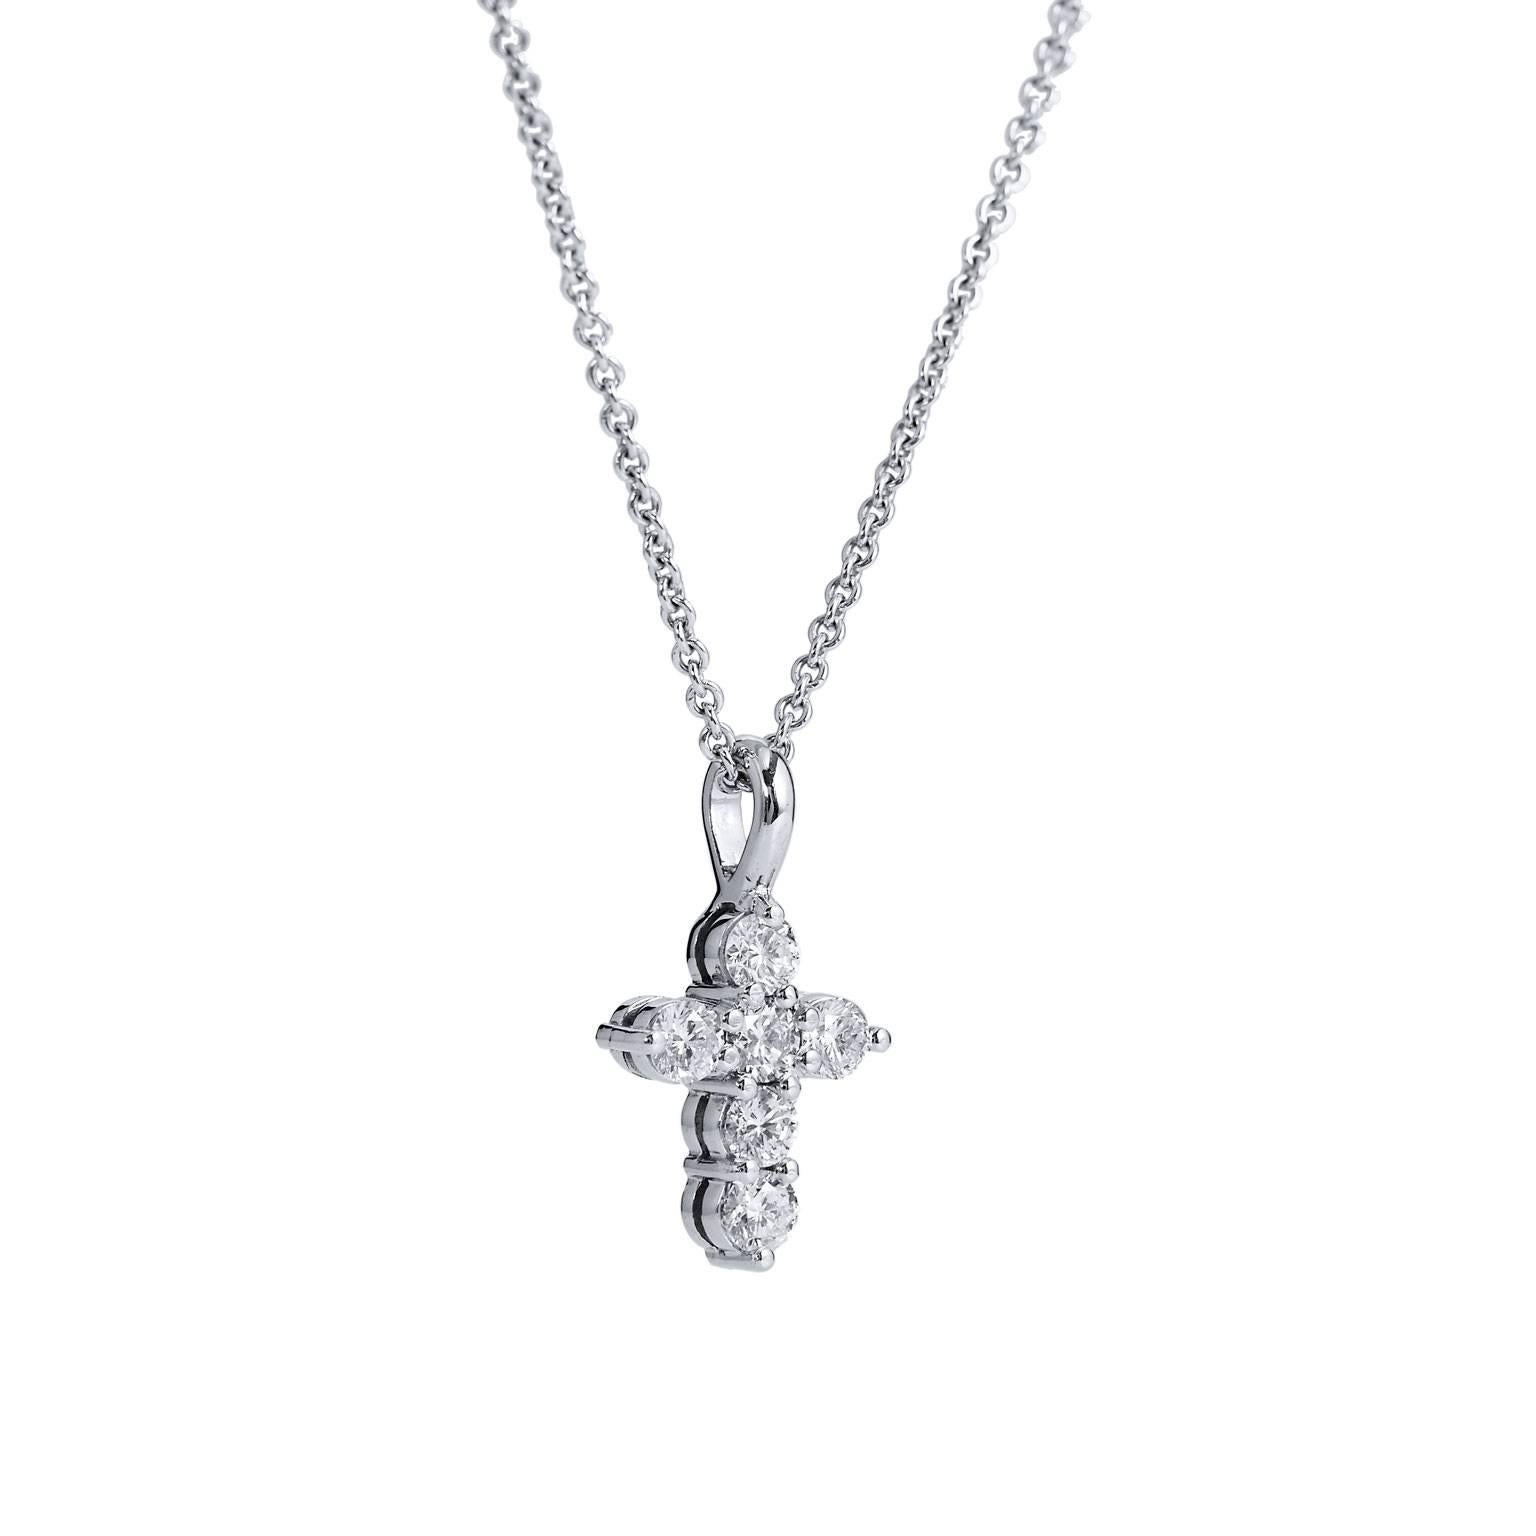 This handmade H and H cross pendant fashioned in 18 karat white gold features 0.59 carat of prong-set round brilliant cut diamonds (H/I/SI1). The timeless design will be your signature piece for decades to come (only the pendant reflected in price).